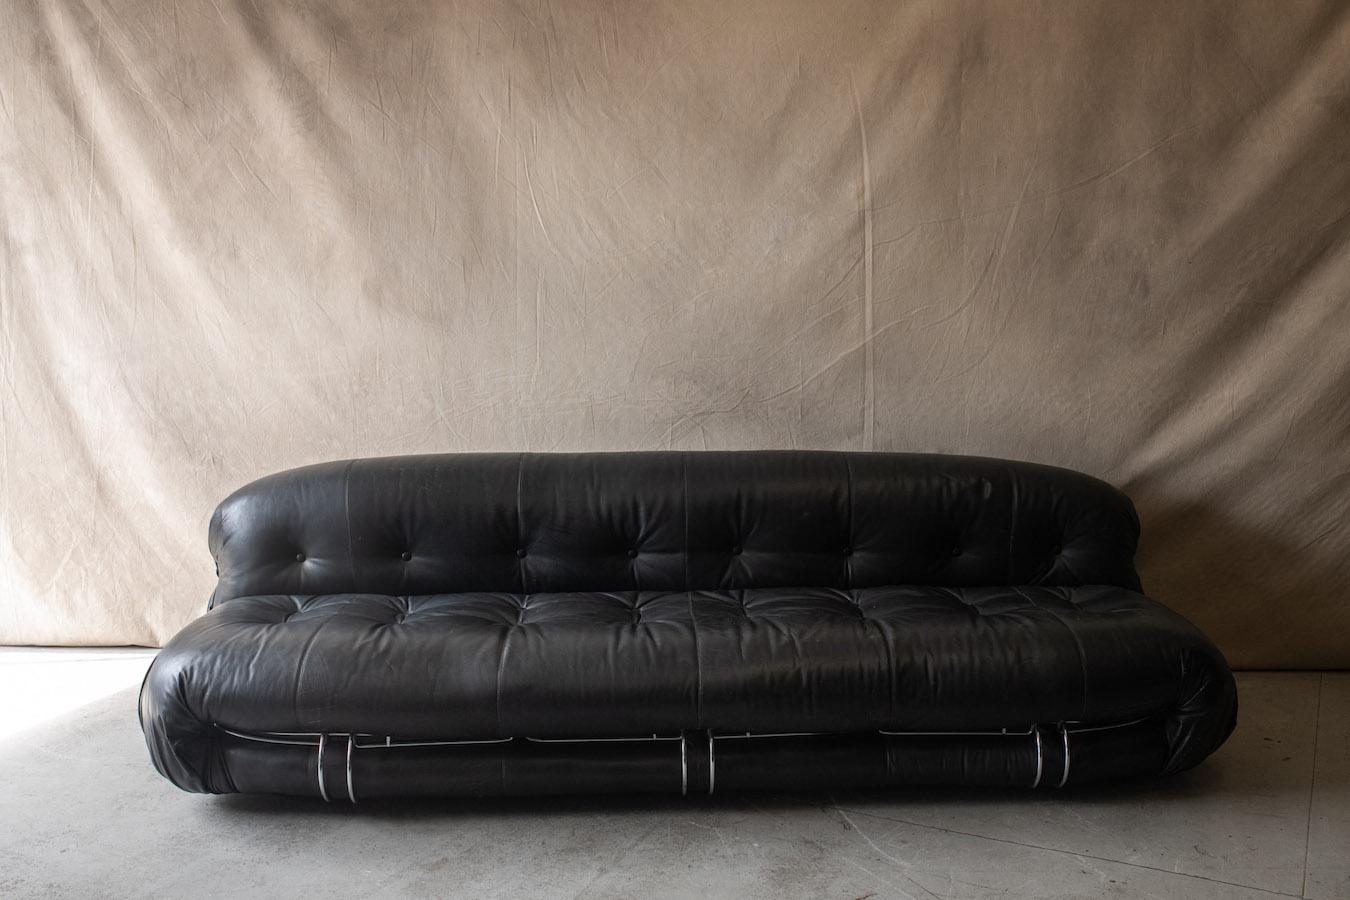 Vintage three seat Soriana sofa by Afra & Tobia Scarpa for Cassina, Italy, 1970.  Original black leather very good vintage condition.  This model is the largest in the ‘Soriana’ series, and won the Compasso d’Oro prize in 1970.

We don't have the